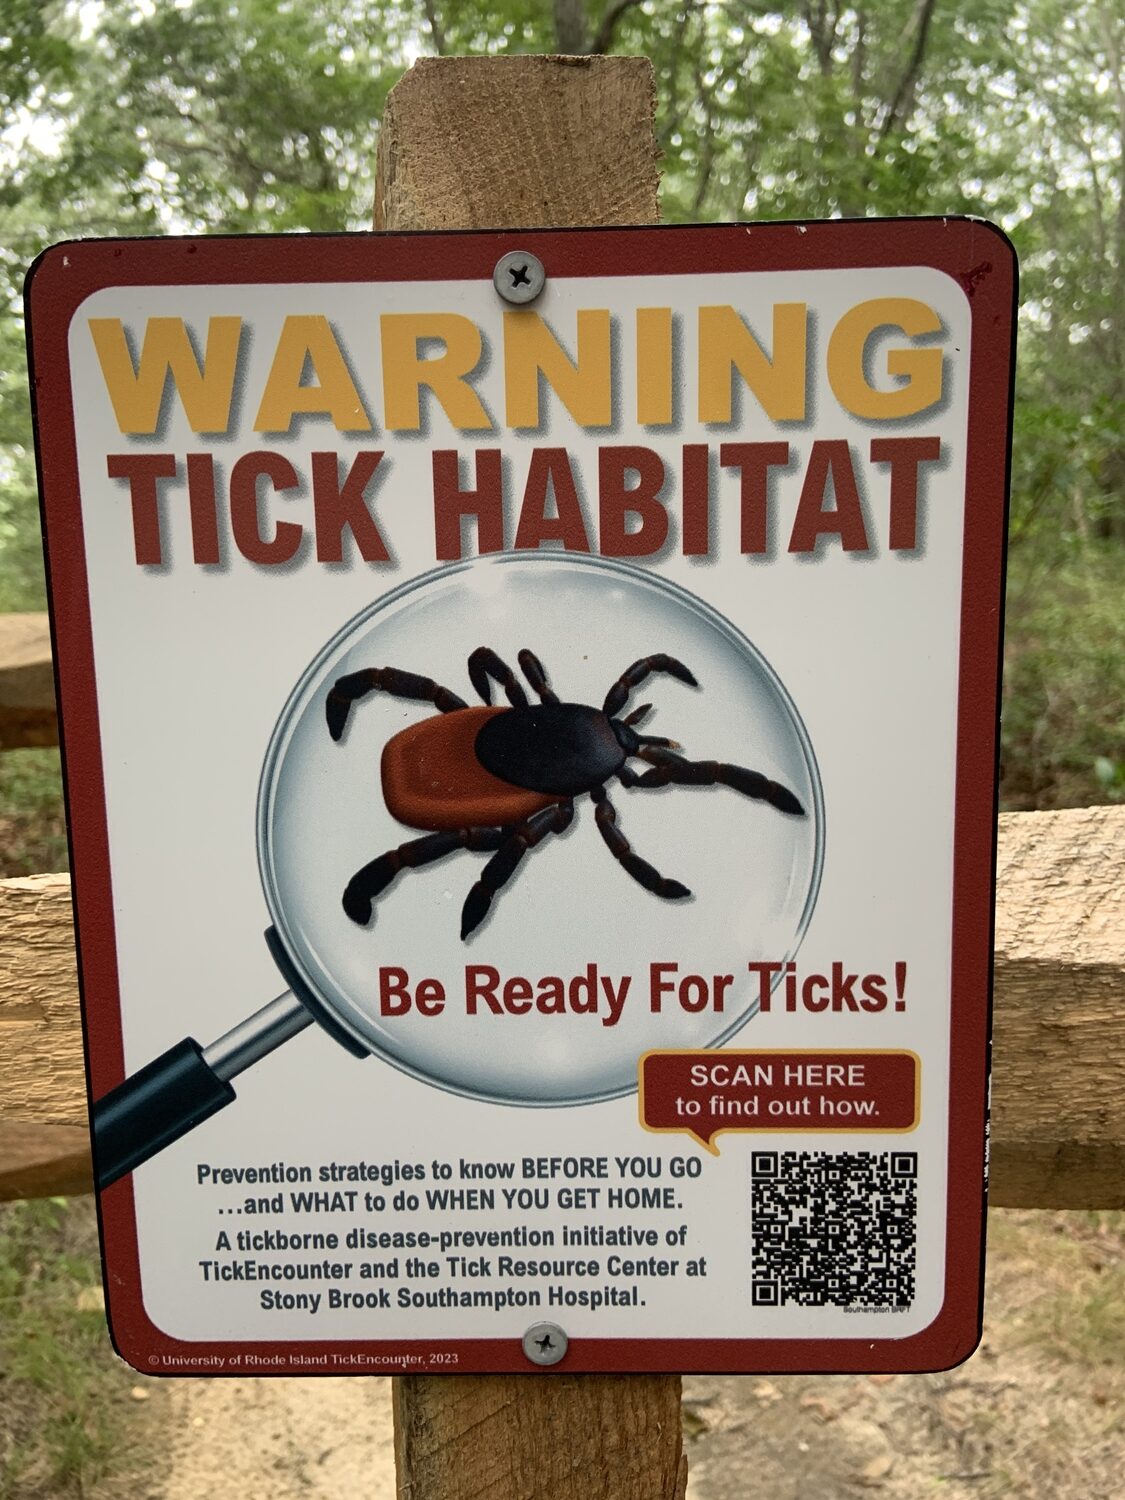 The placards include a QR code that links to information about staying safe from ticks while on the trails.